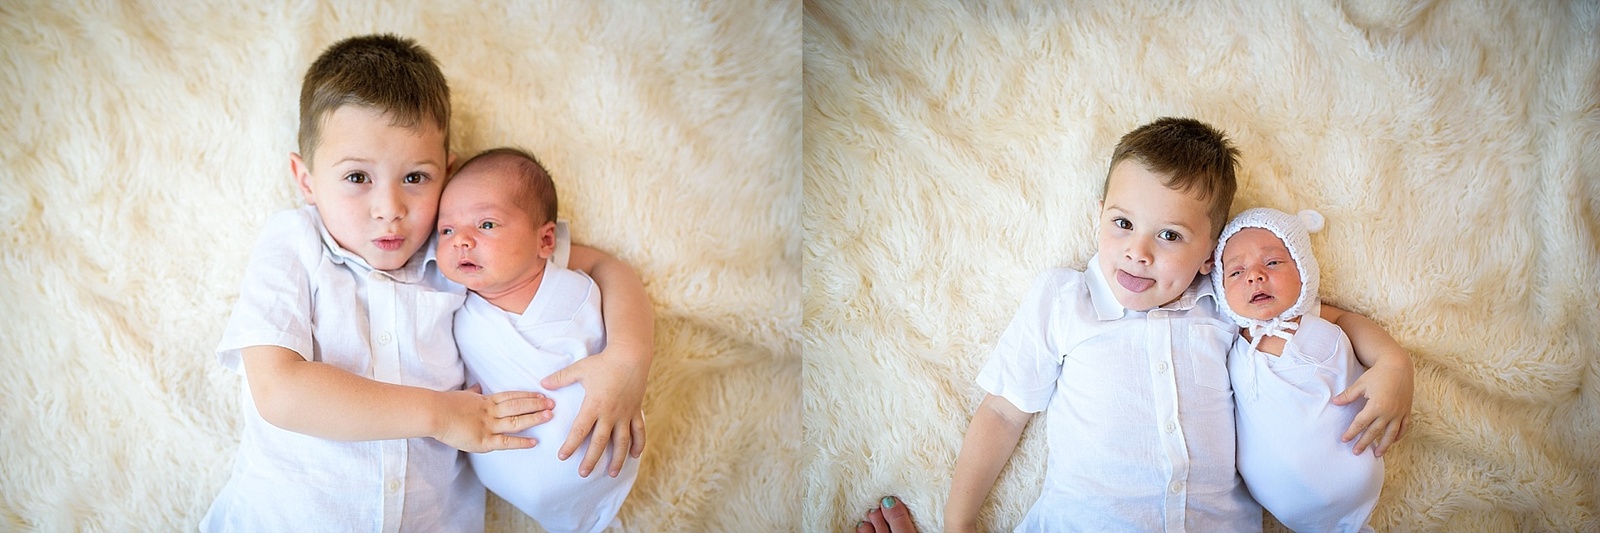 Big brother and baby brother pose for newborn photoshoot